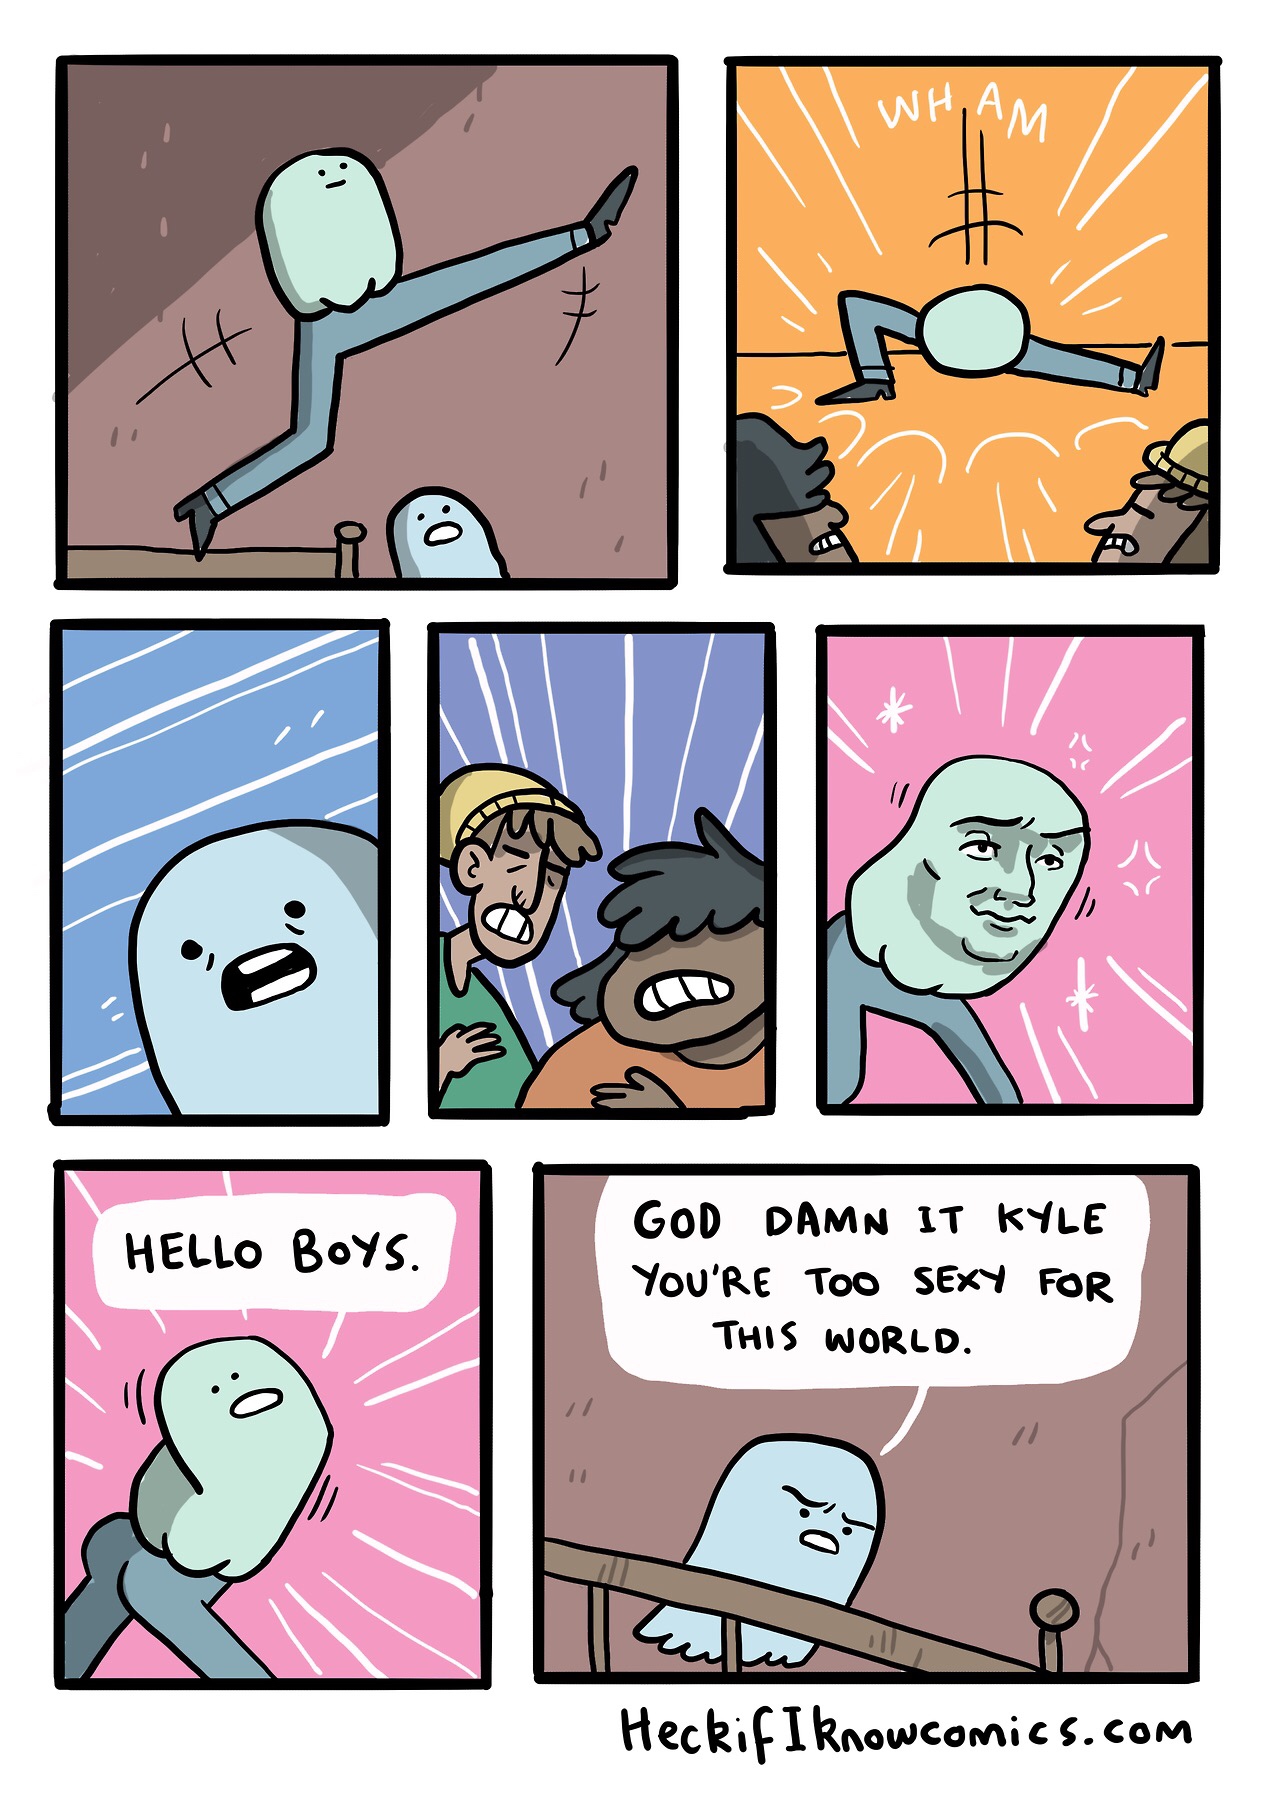 meme heck if i know comics ghost - Wham Hello Boys God Damn It Kyle You'Re Too Sexy For This World. Heckif I knowcomics.com